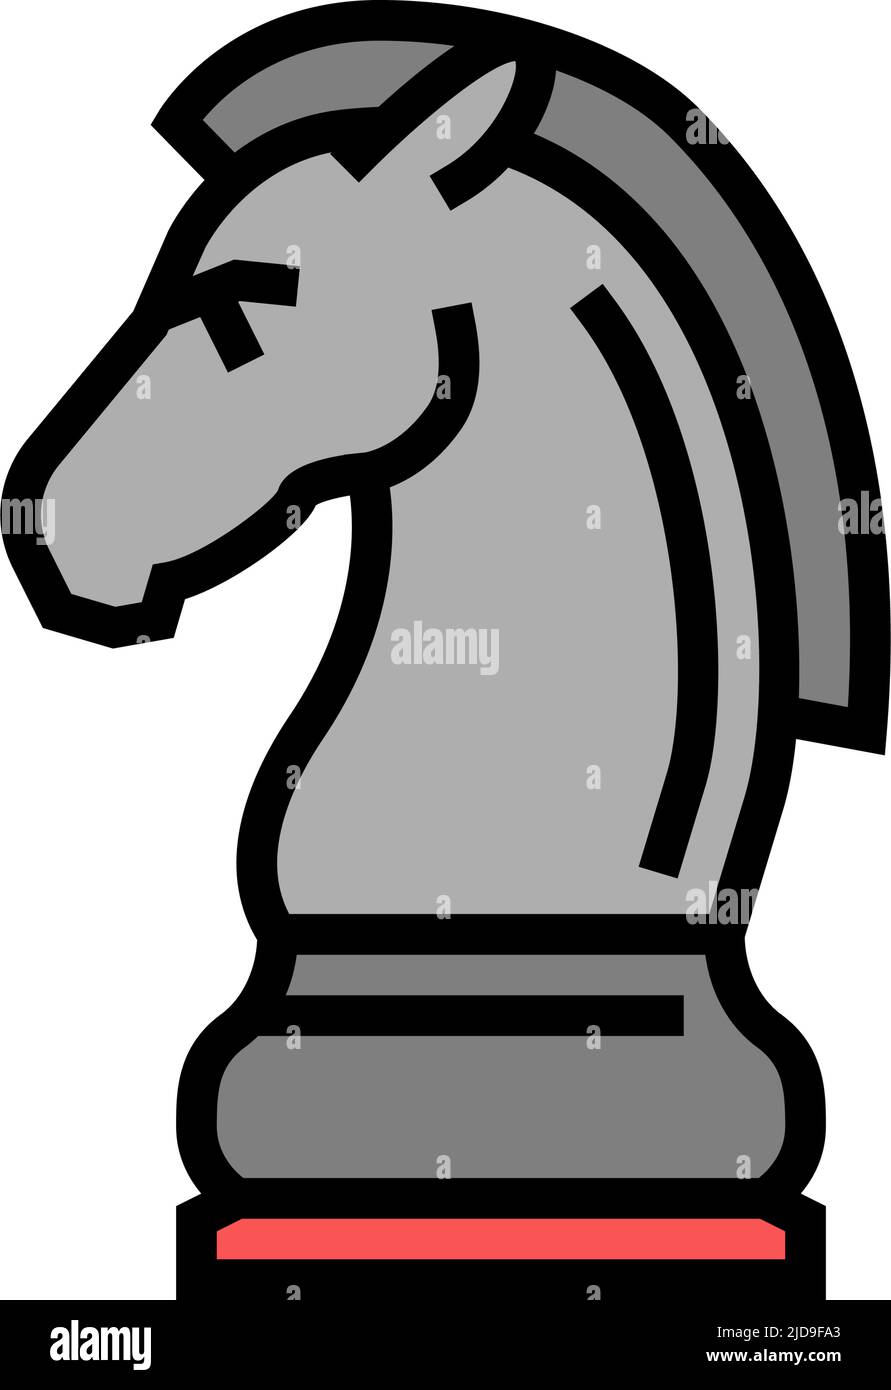 horse chess color icon vector illustration Stock Vector